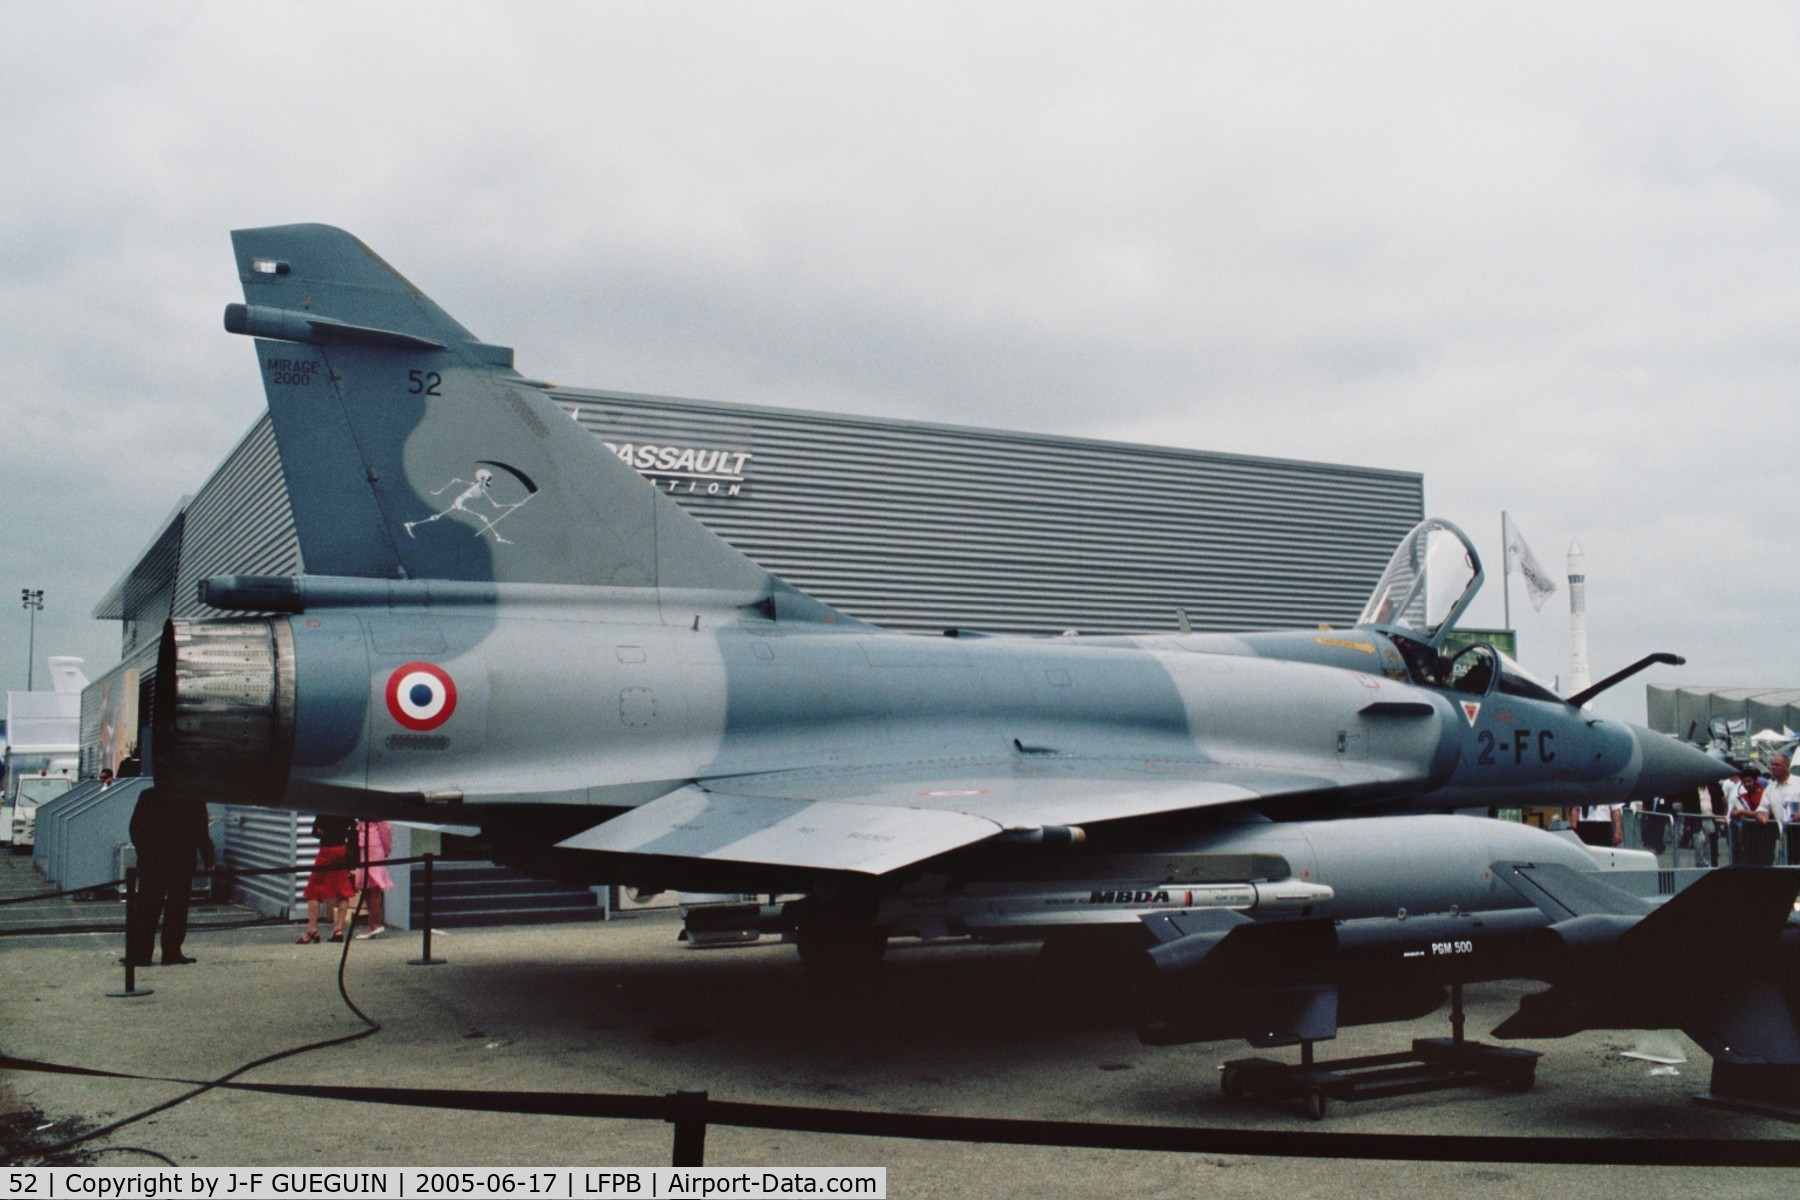 52, Dassault Mirage 2000-5F C/N 240, On display at Paris-Le Bourget 2005 airshow, with code 2-FC in EC 02.002 